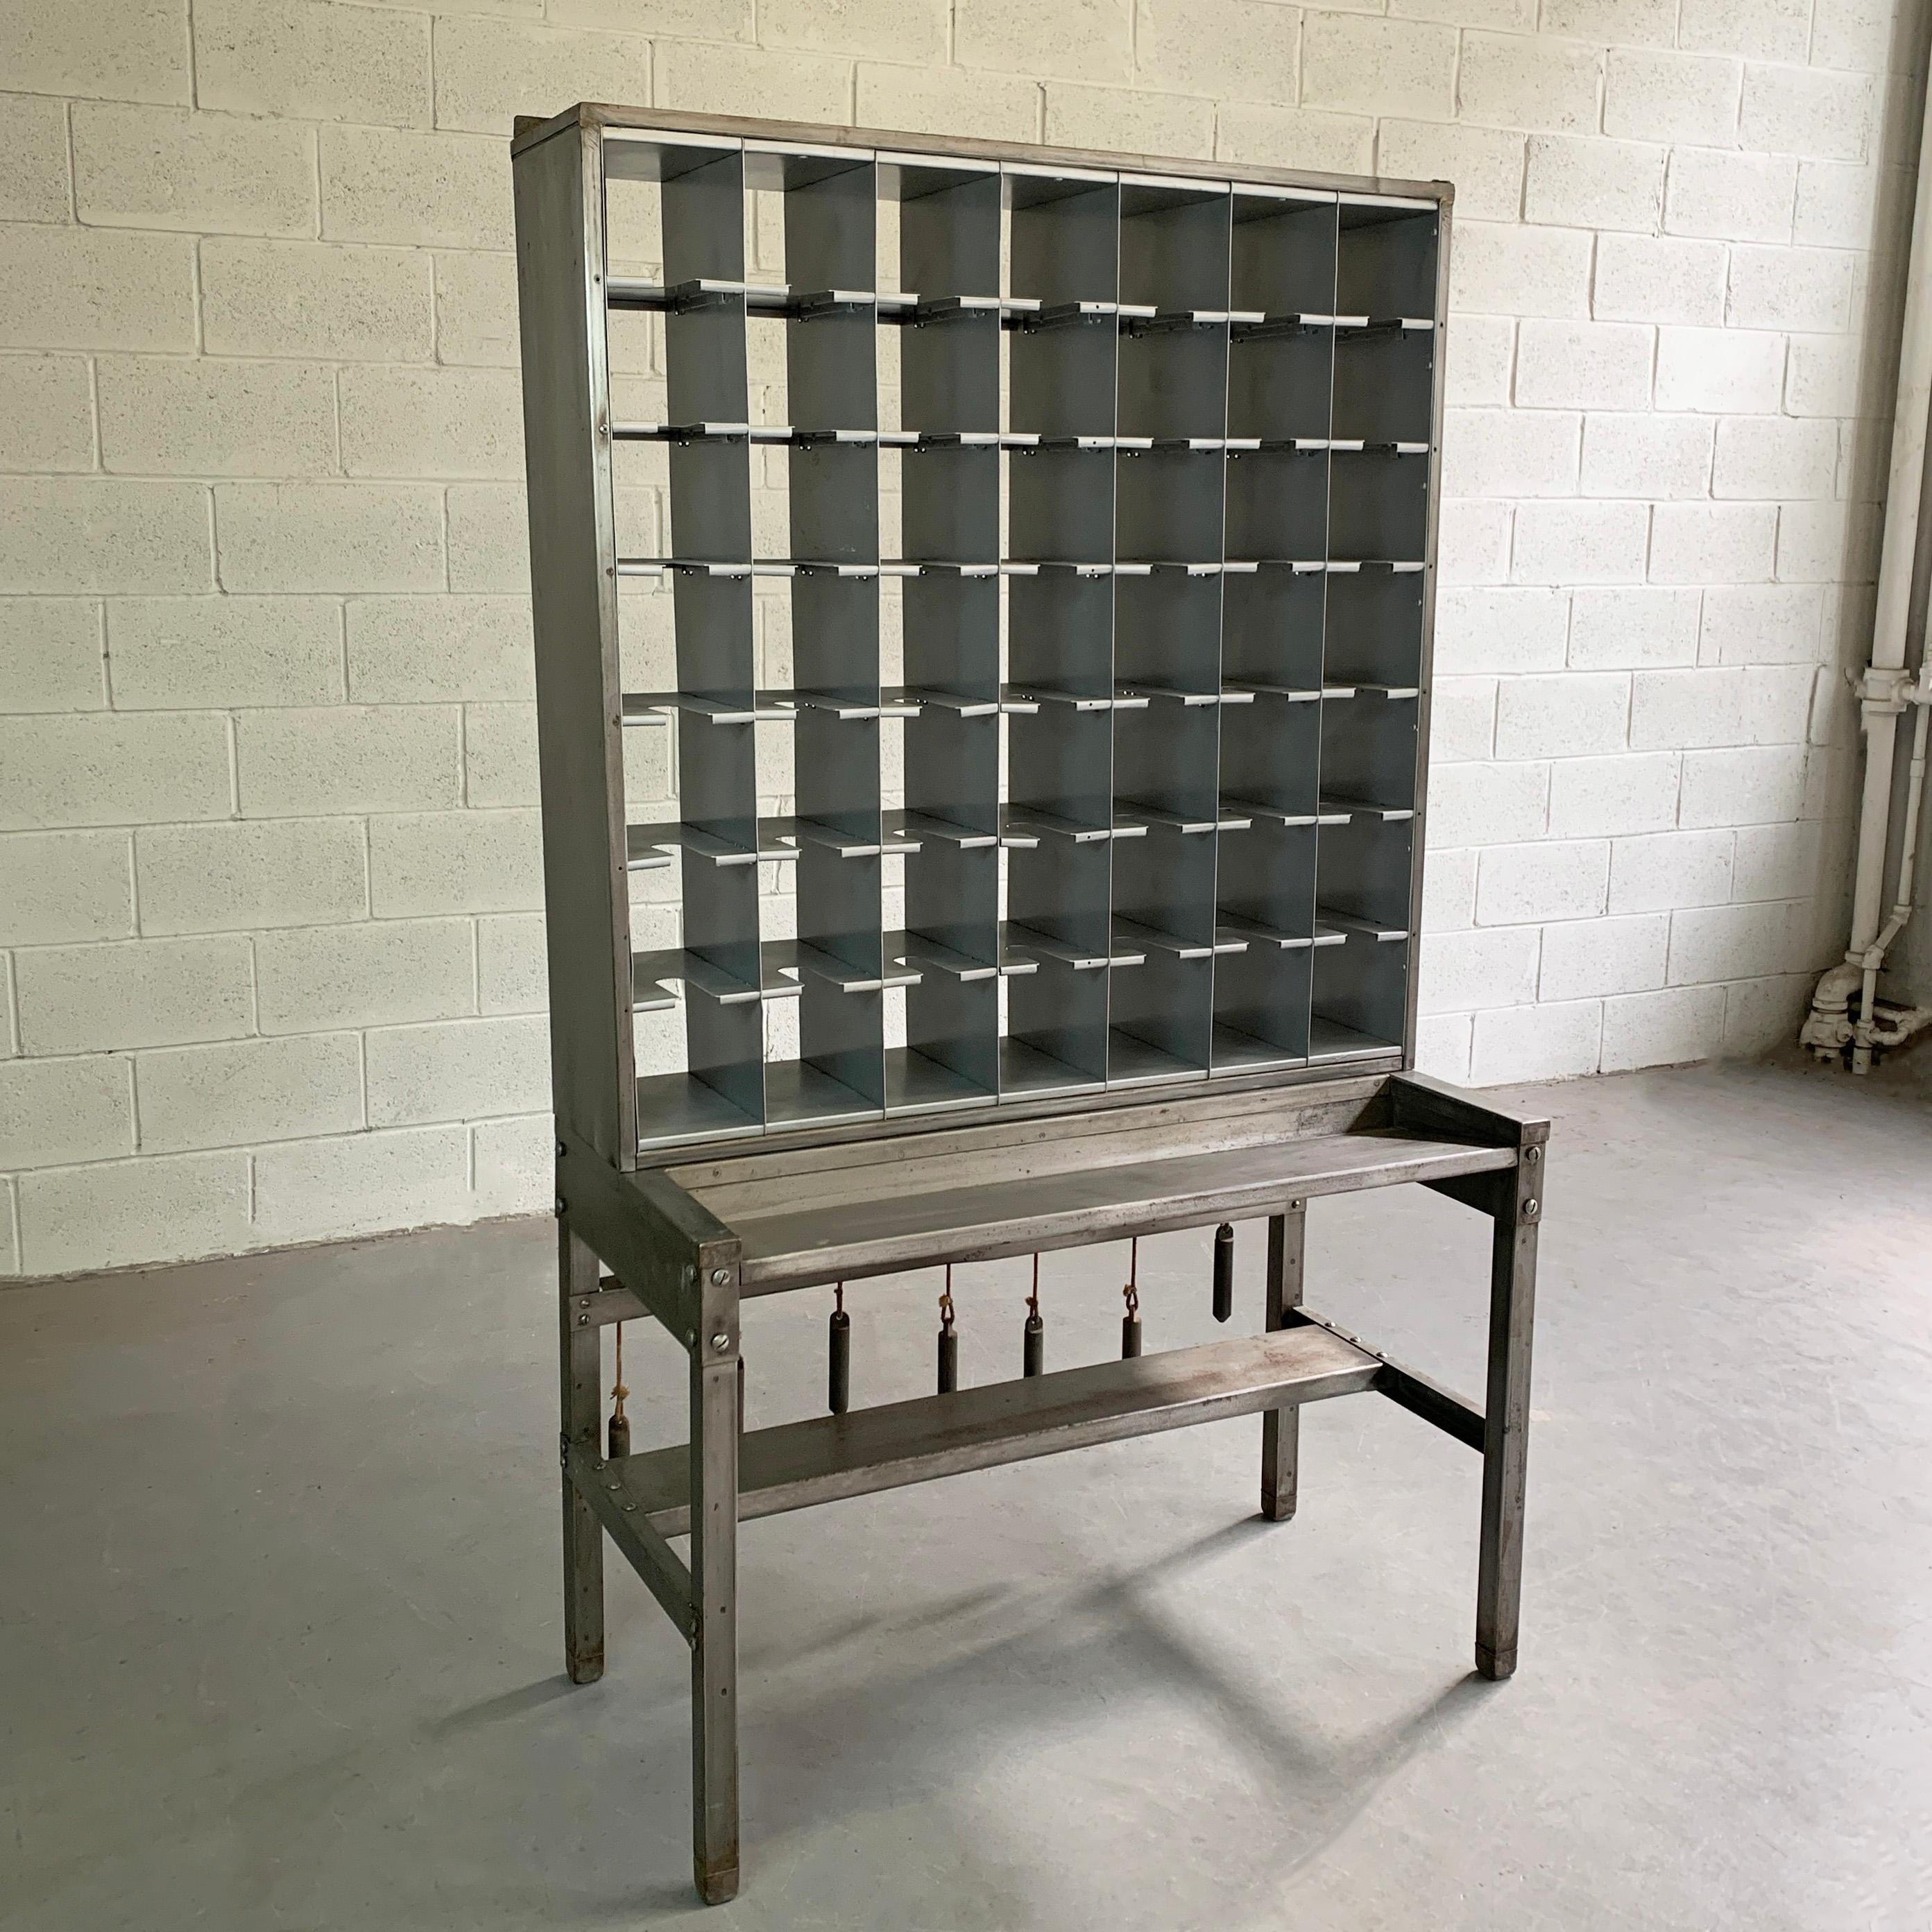 Midcentury, industrial, steel, mail sorter unit features 49, 6 x 6 x 10 inch deep cubby hole, mail slots, work ledge at 27 inches height and tension ropes with weights in the back that aids in placing the mail in at the time of sorting. The lower